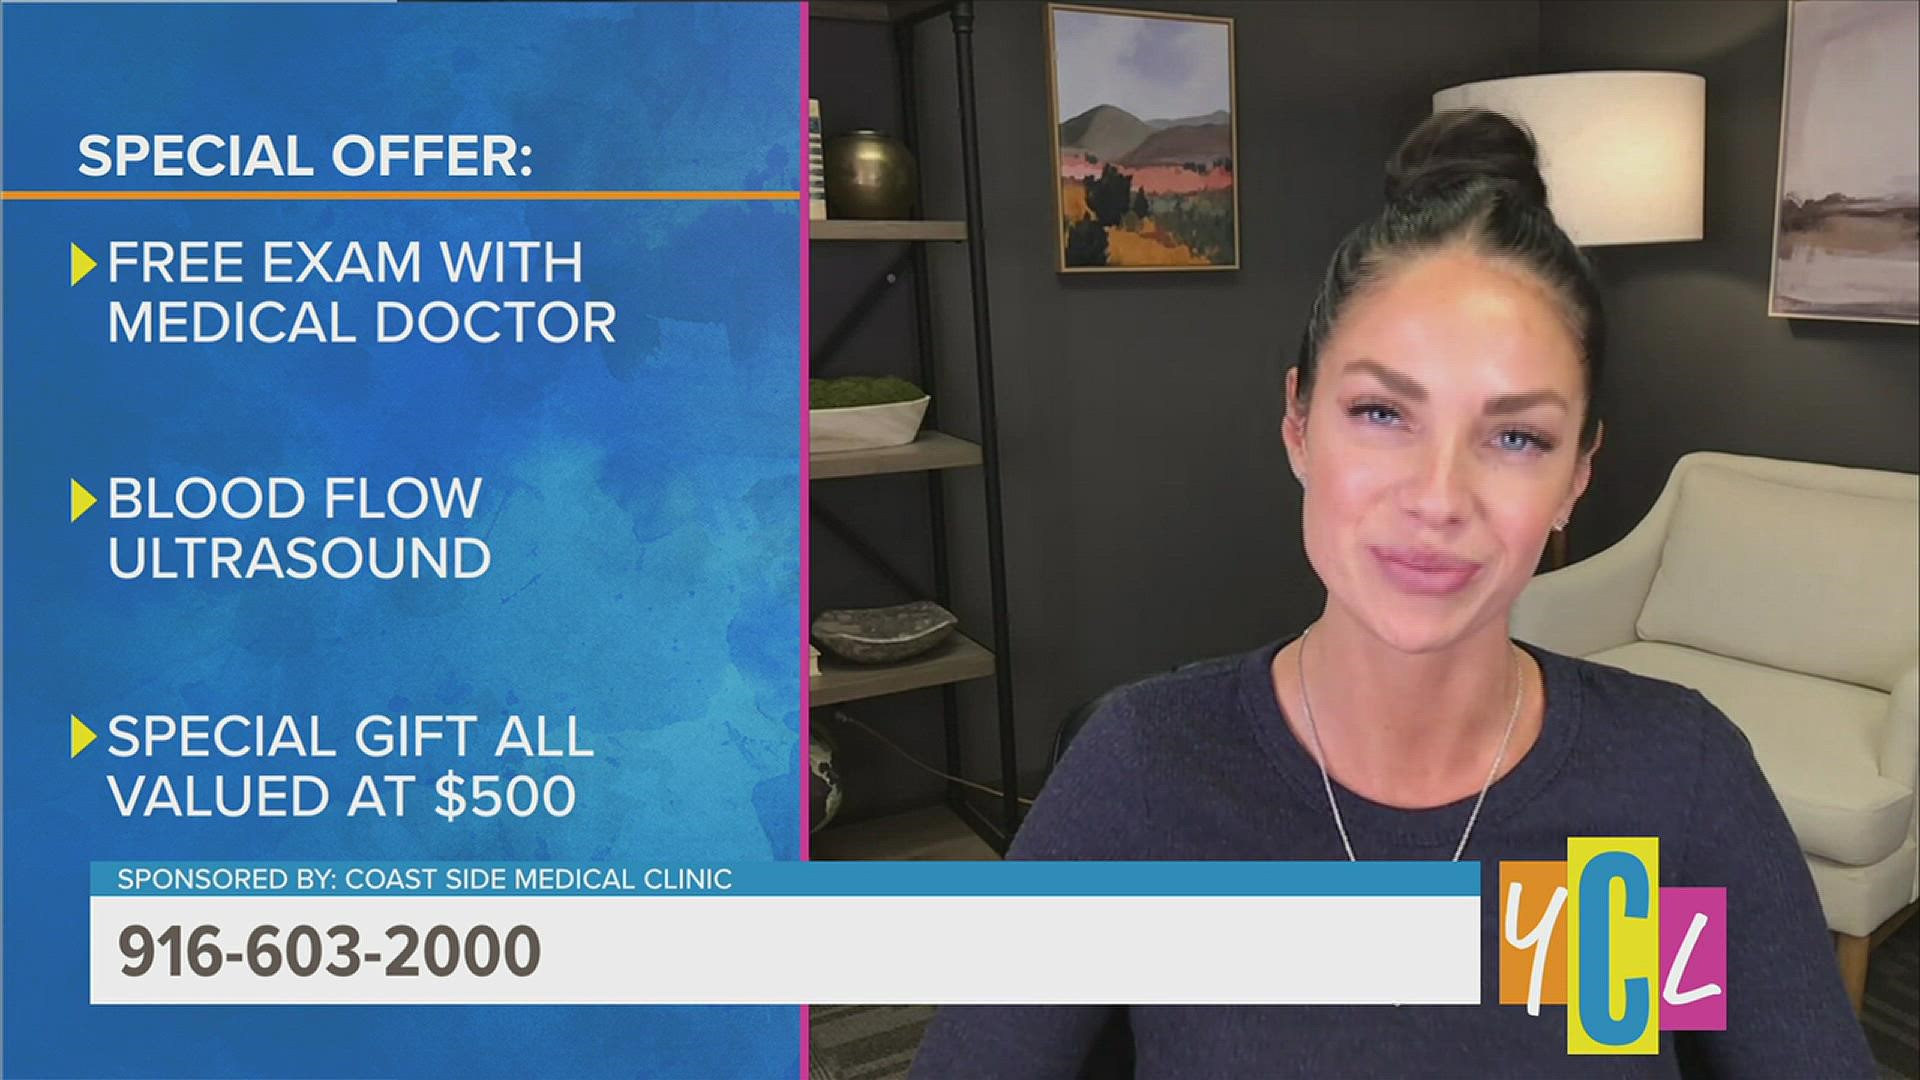 Coast Side Clinic addresses how couples can discuss ED and treatment options for this medical condition. This segment was paid for by Coast Side Clinic.